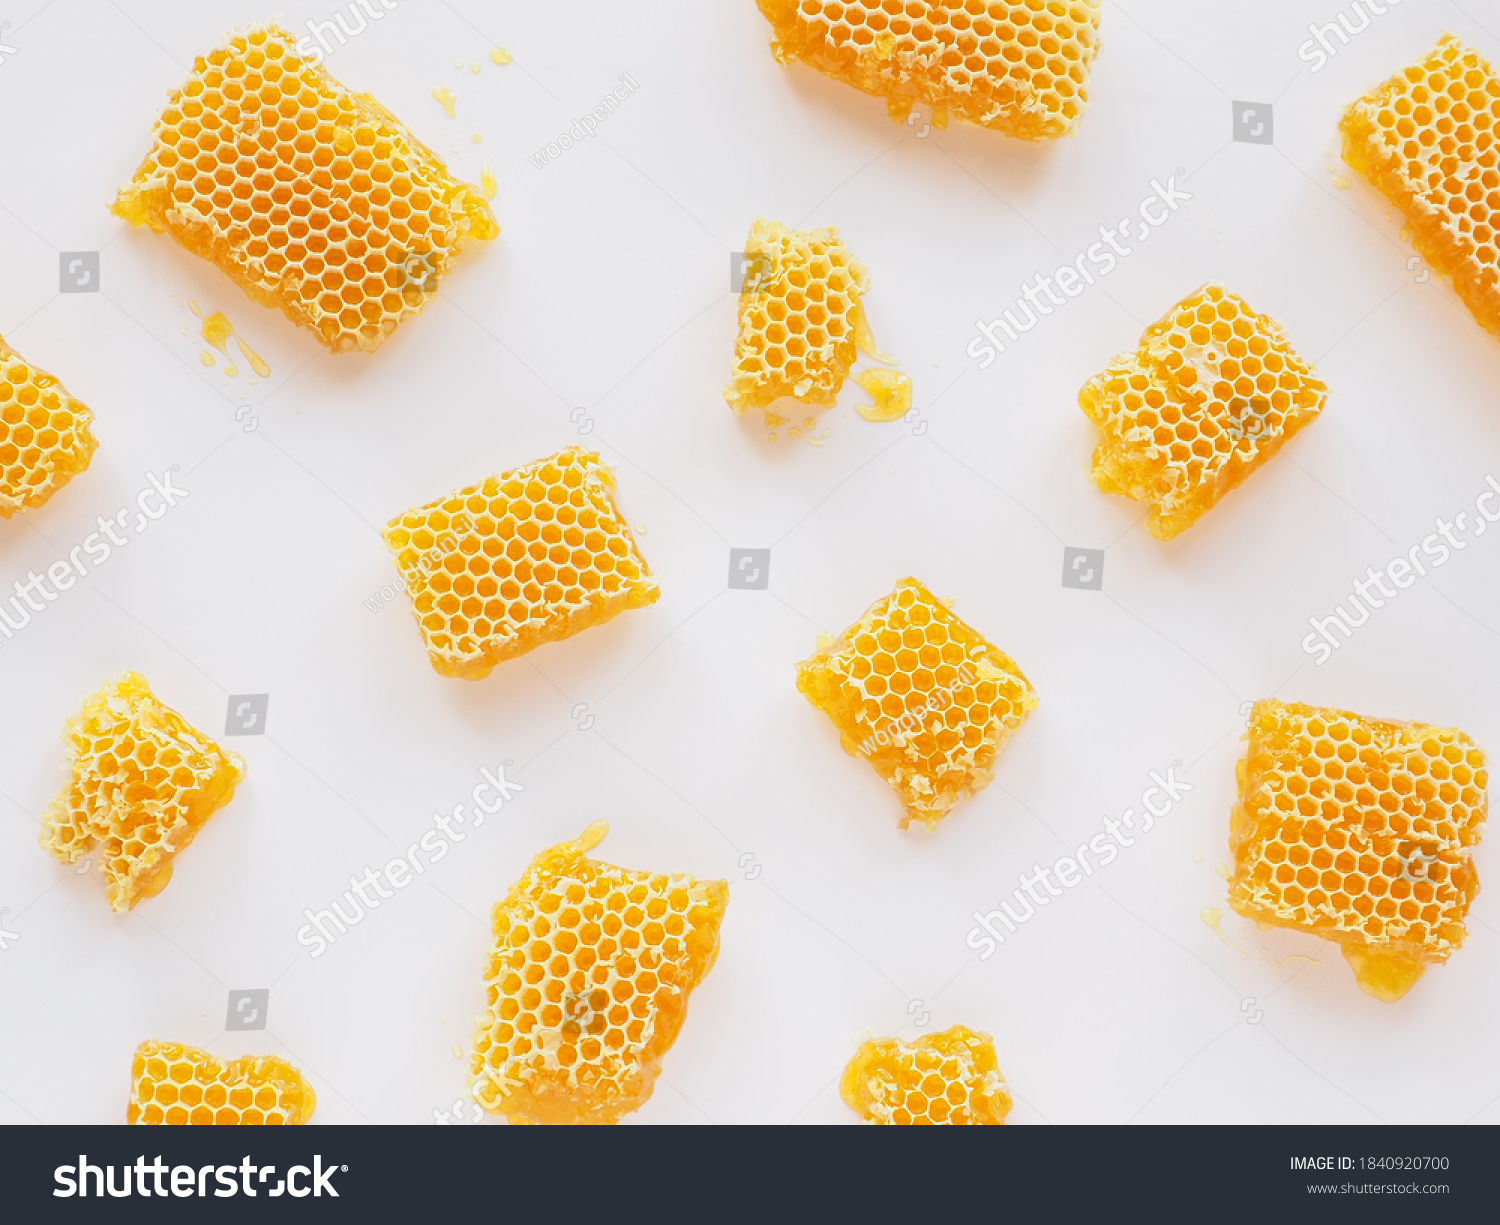 Honeycombs with natural healthy bees wax texture. Top view #1840920700